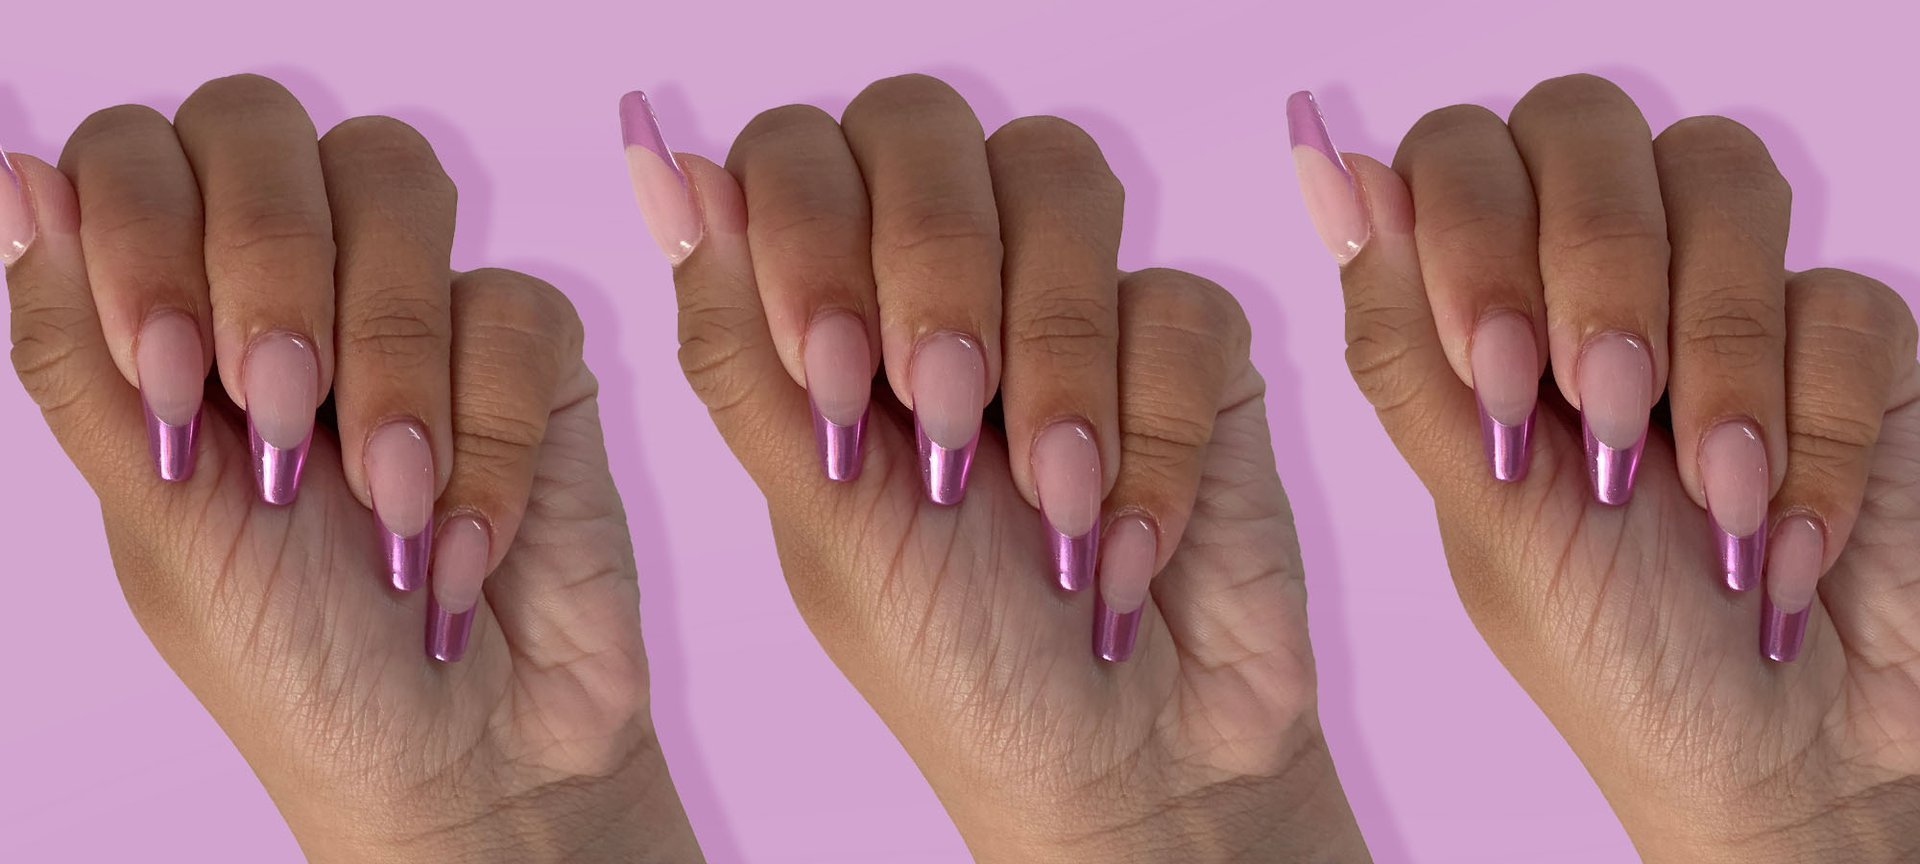 From Acrylics to Gel, Here are the Types of Manicures to Try in 2022 |  ClassPass